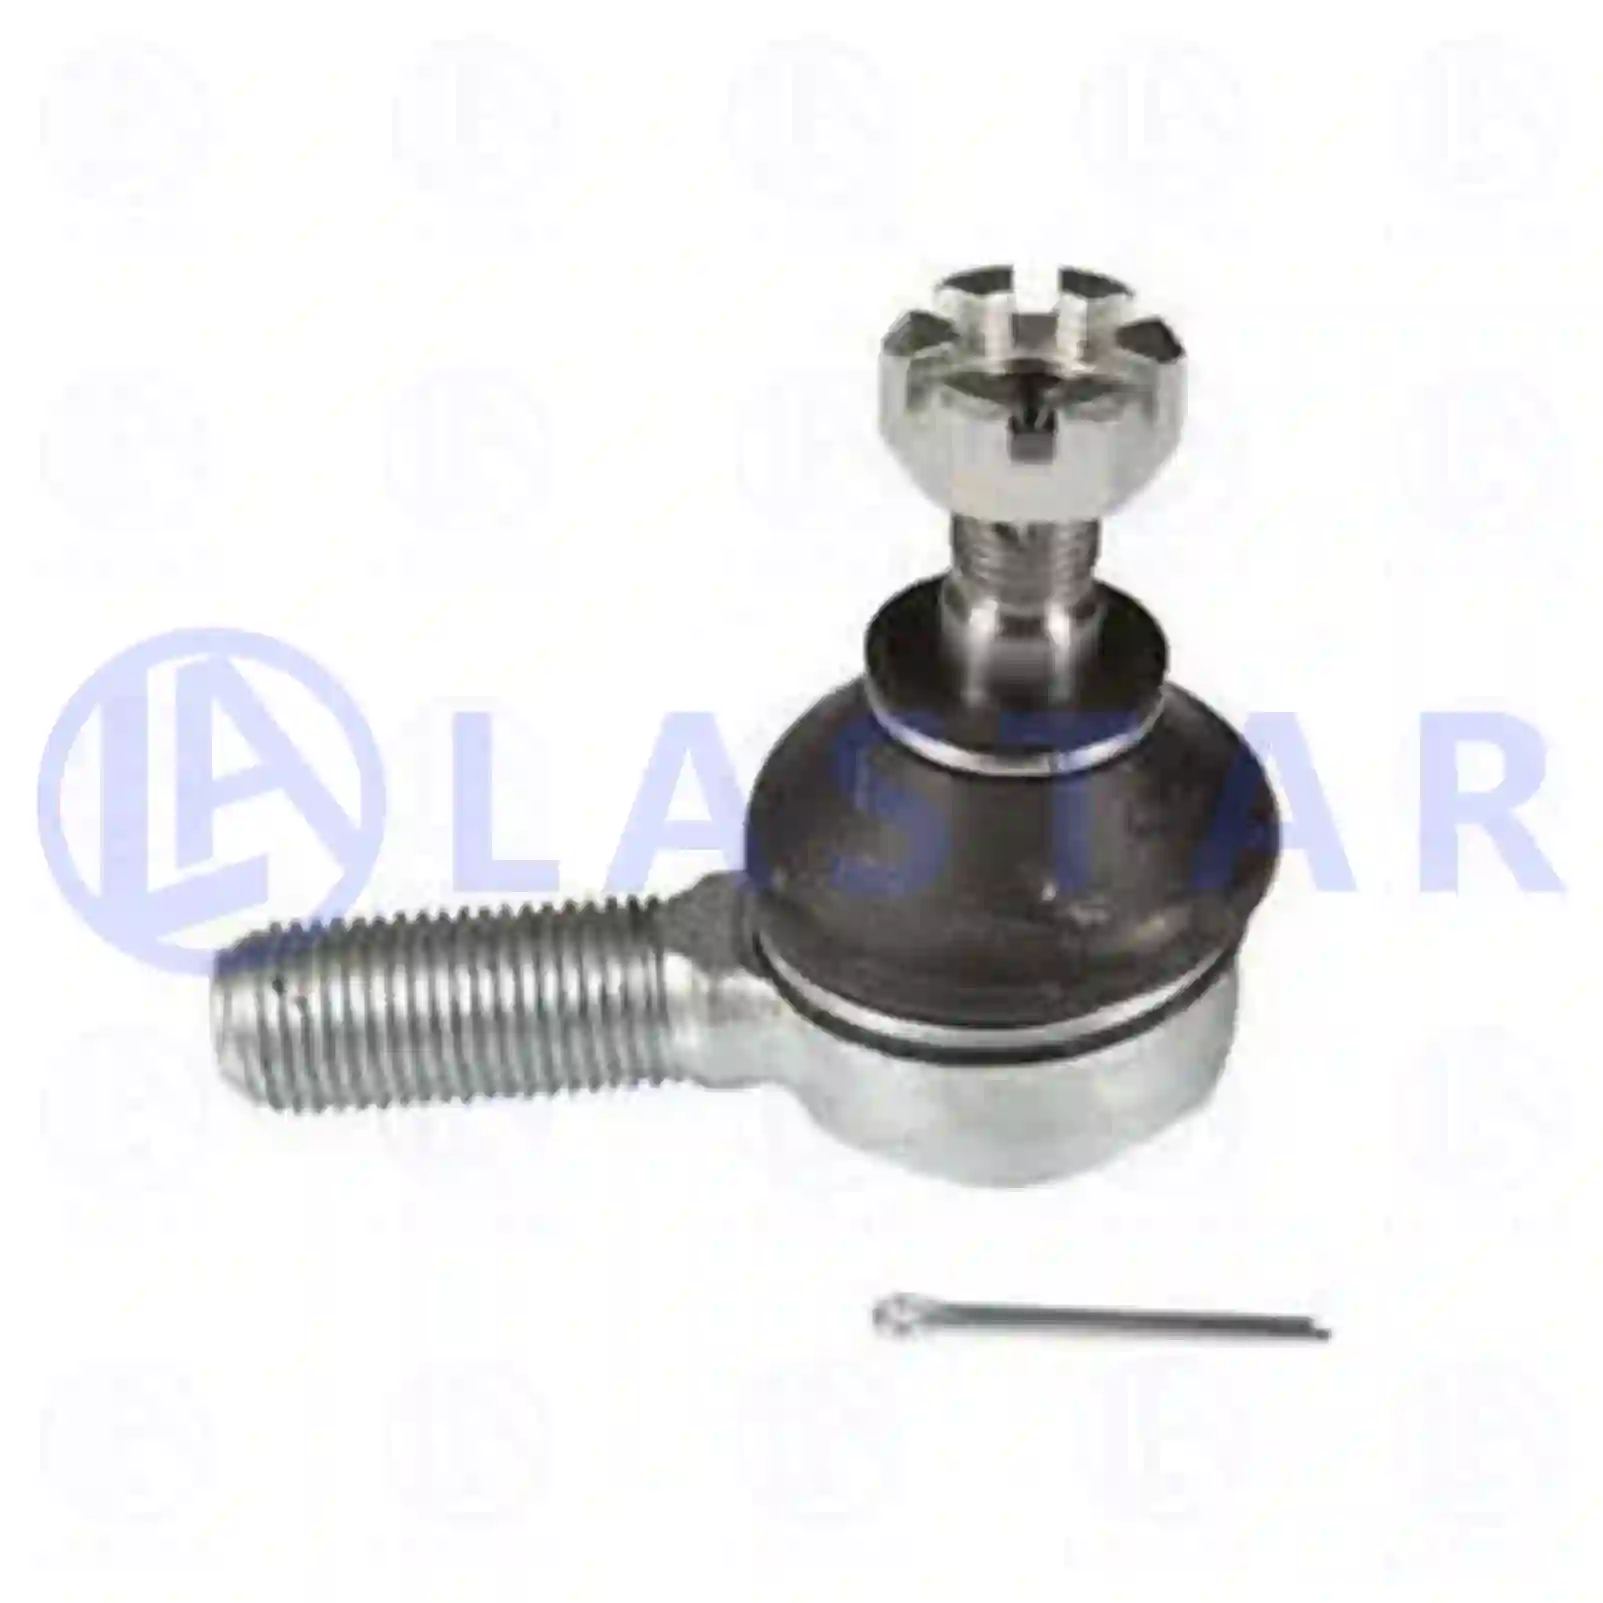 Ball joint, right hand thread, 77732812, 0009965245, 6732680189, , ||  77732812 Lastar Spare Part | Truck Spare Parts, Auotomotive Spare Parts Ball joint, right hand thread, 77732812, 0009965245, 6732680189, , ||  77732812 Lastar Spare Part | Truck Spare Parts, Auotomotive Spare Parts